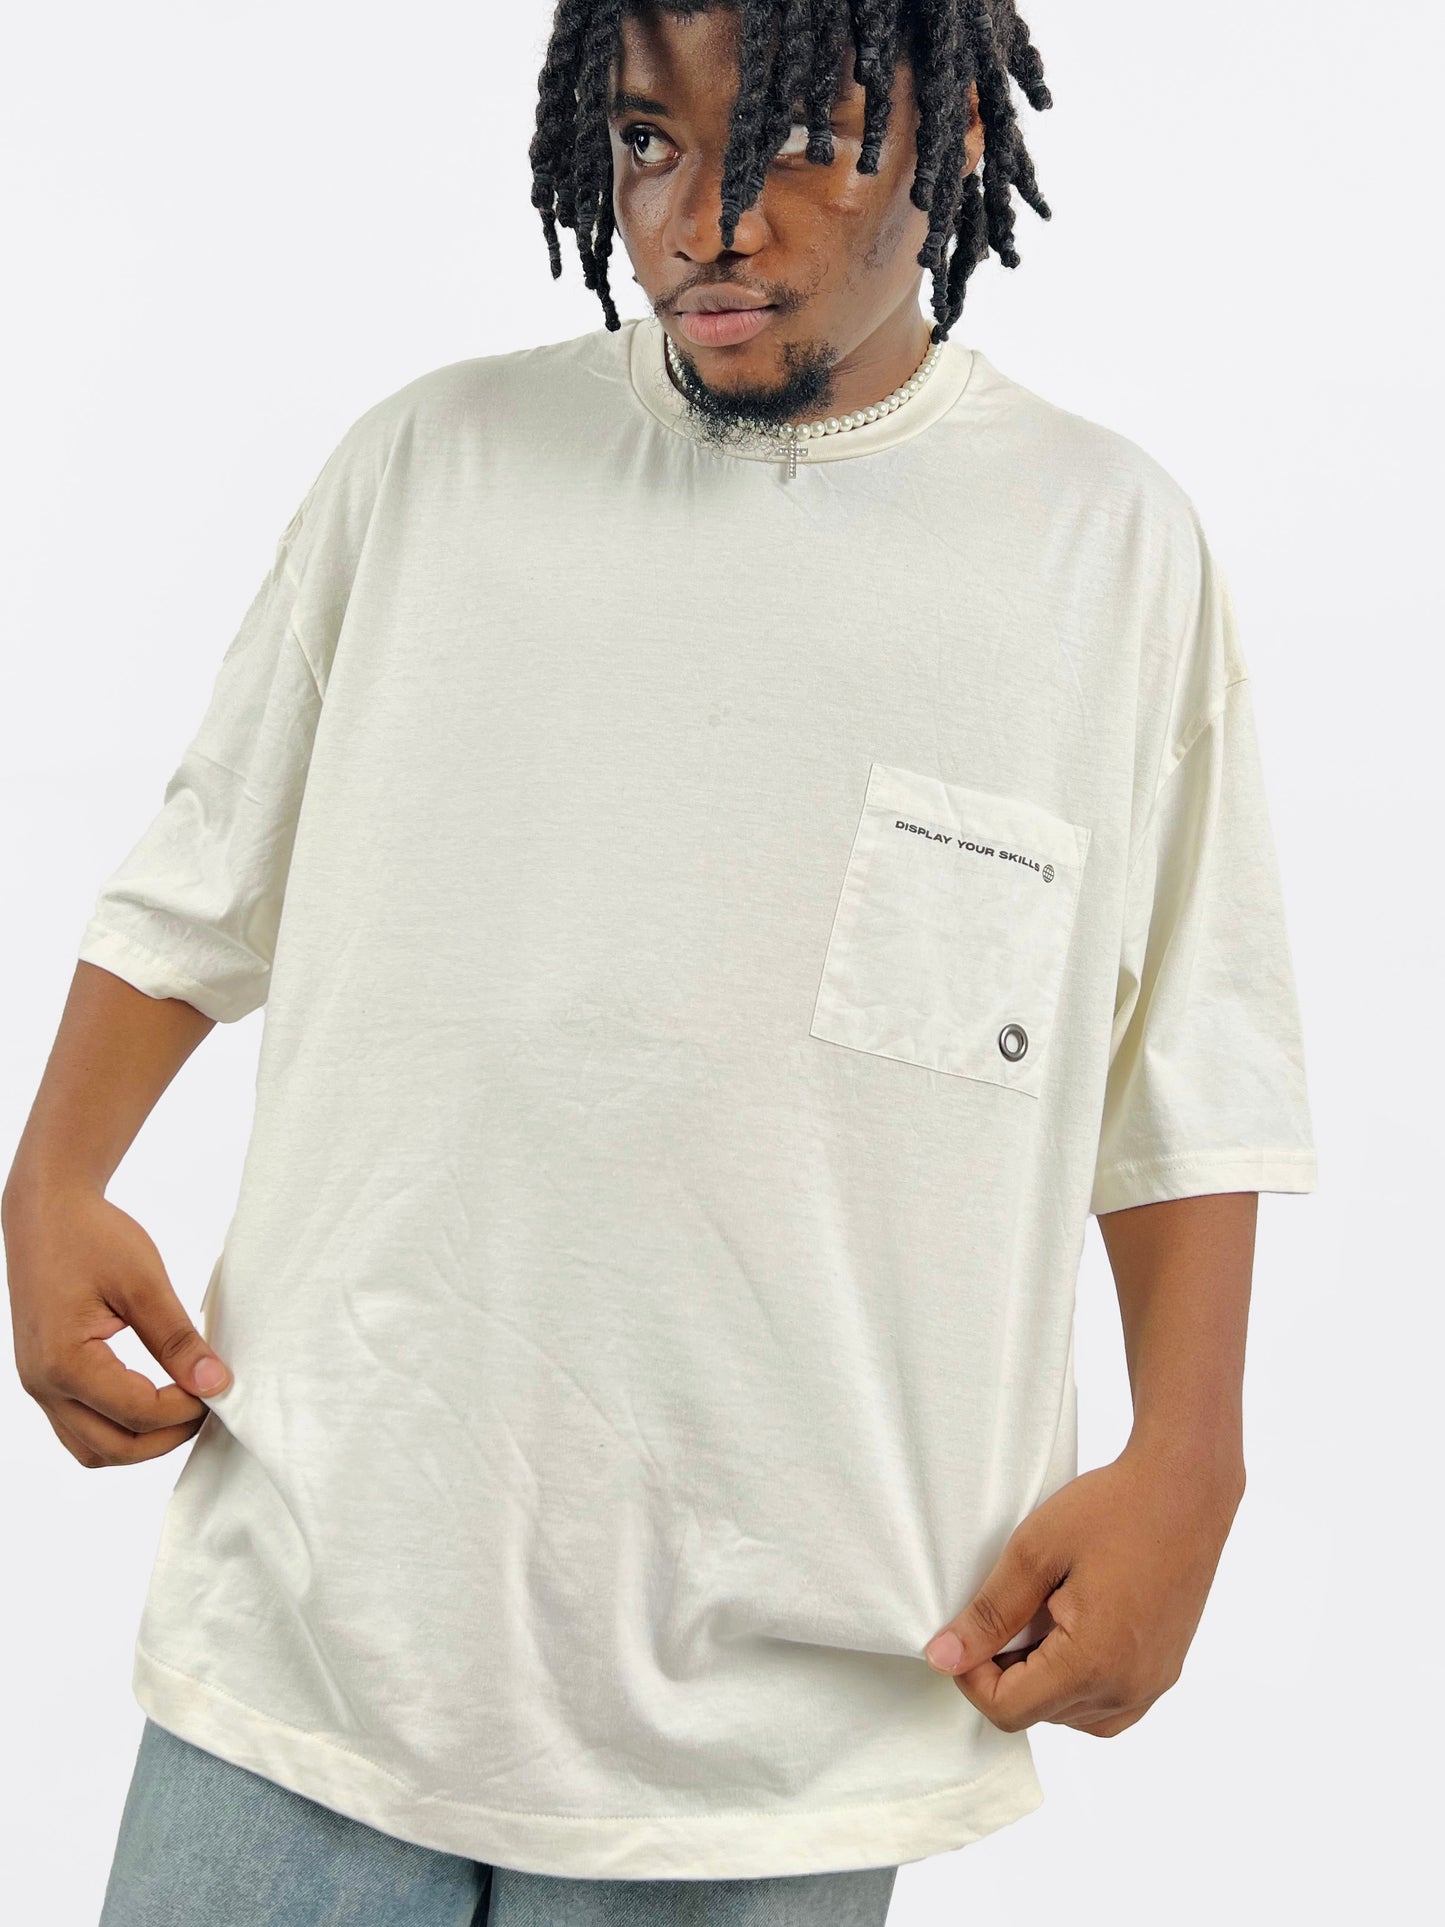 C&A Oversized pocket print T-shirt in off white